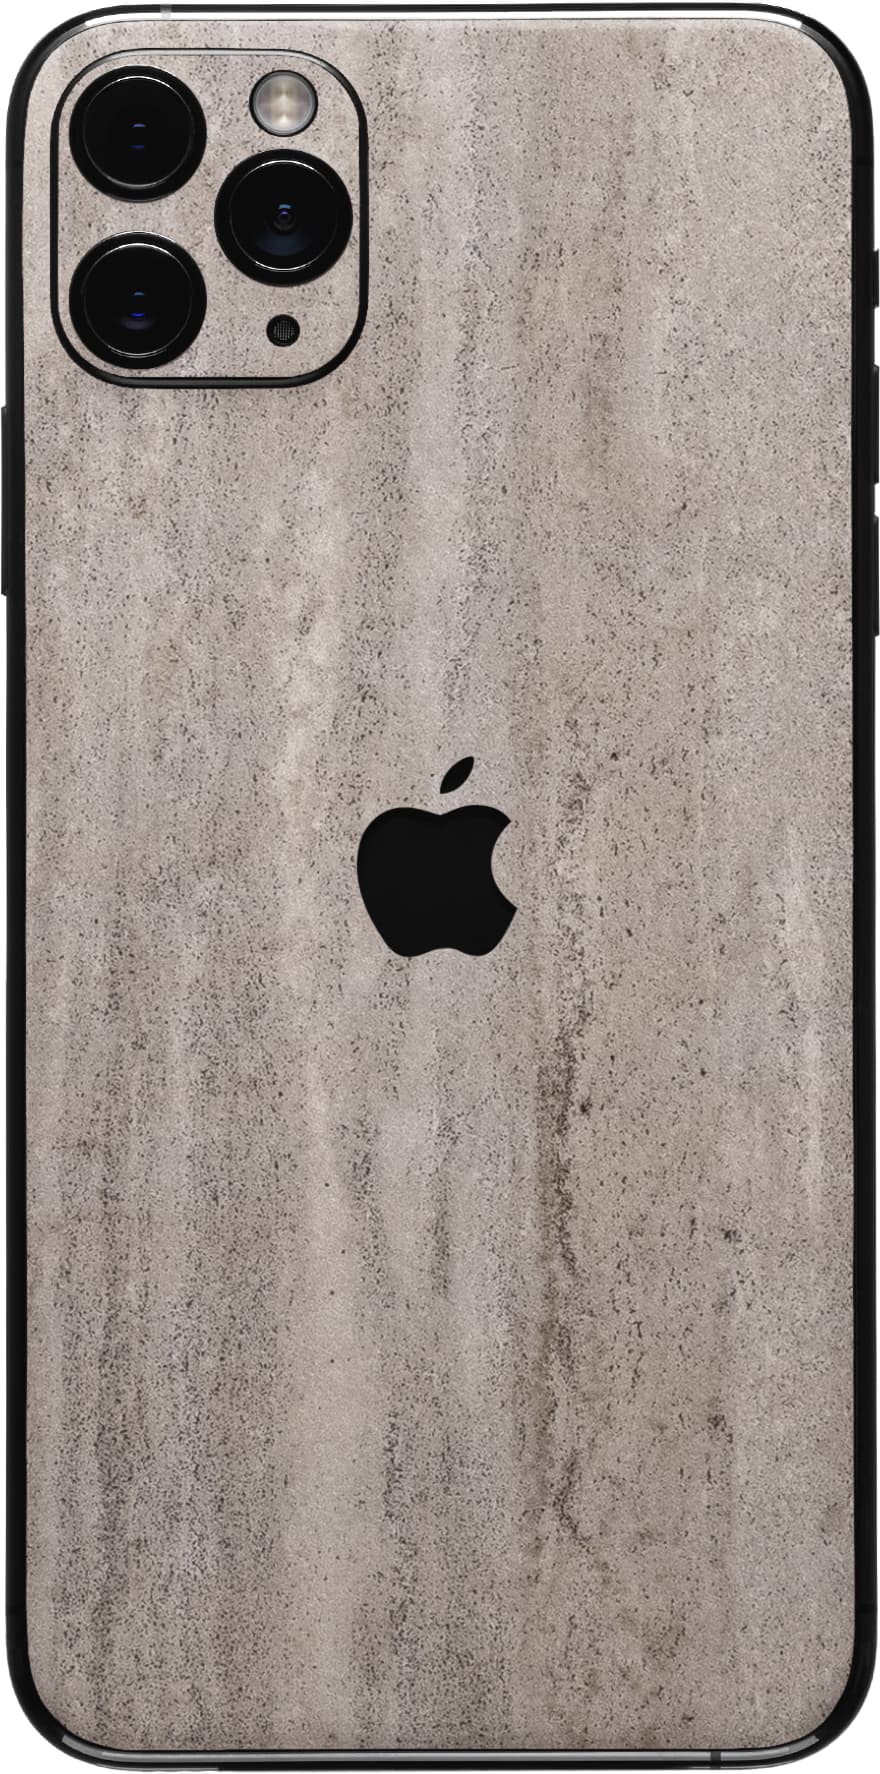 iPhone 11 Pro Max Skins, Wraps & Covers » dbrand